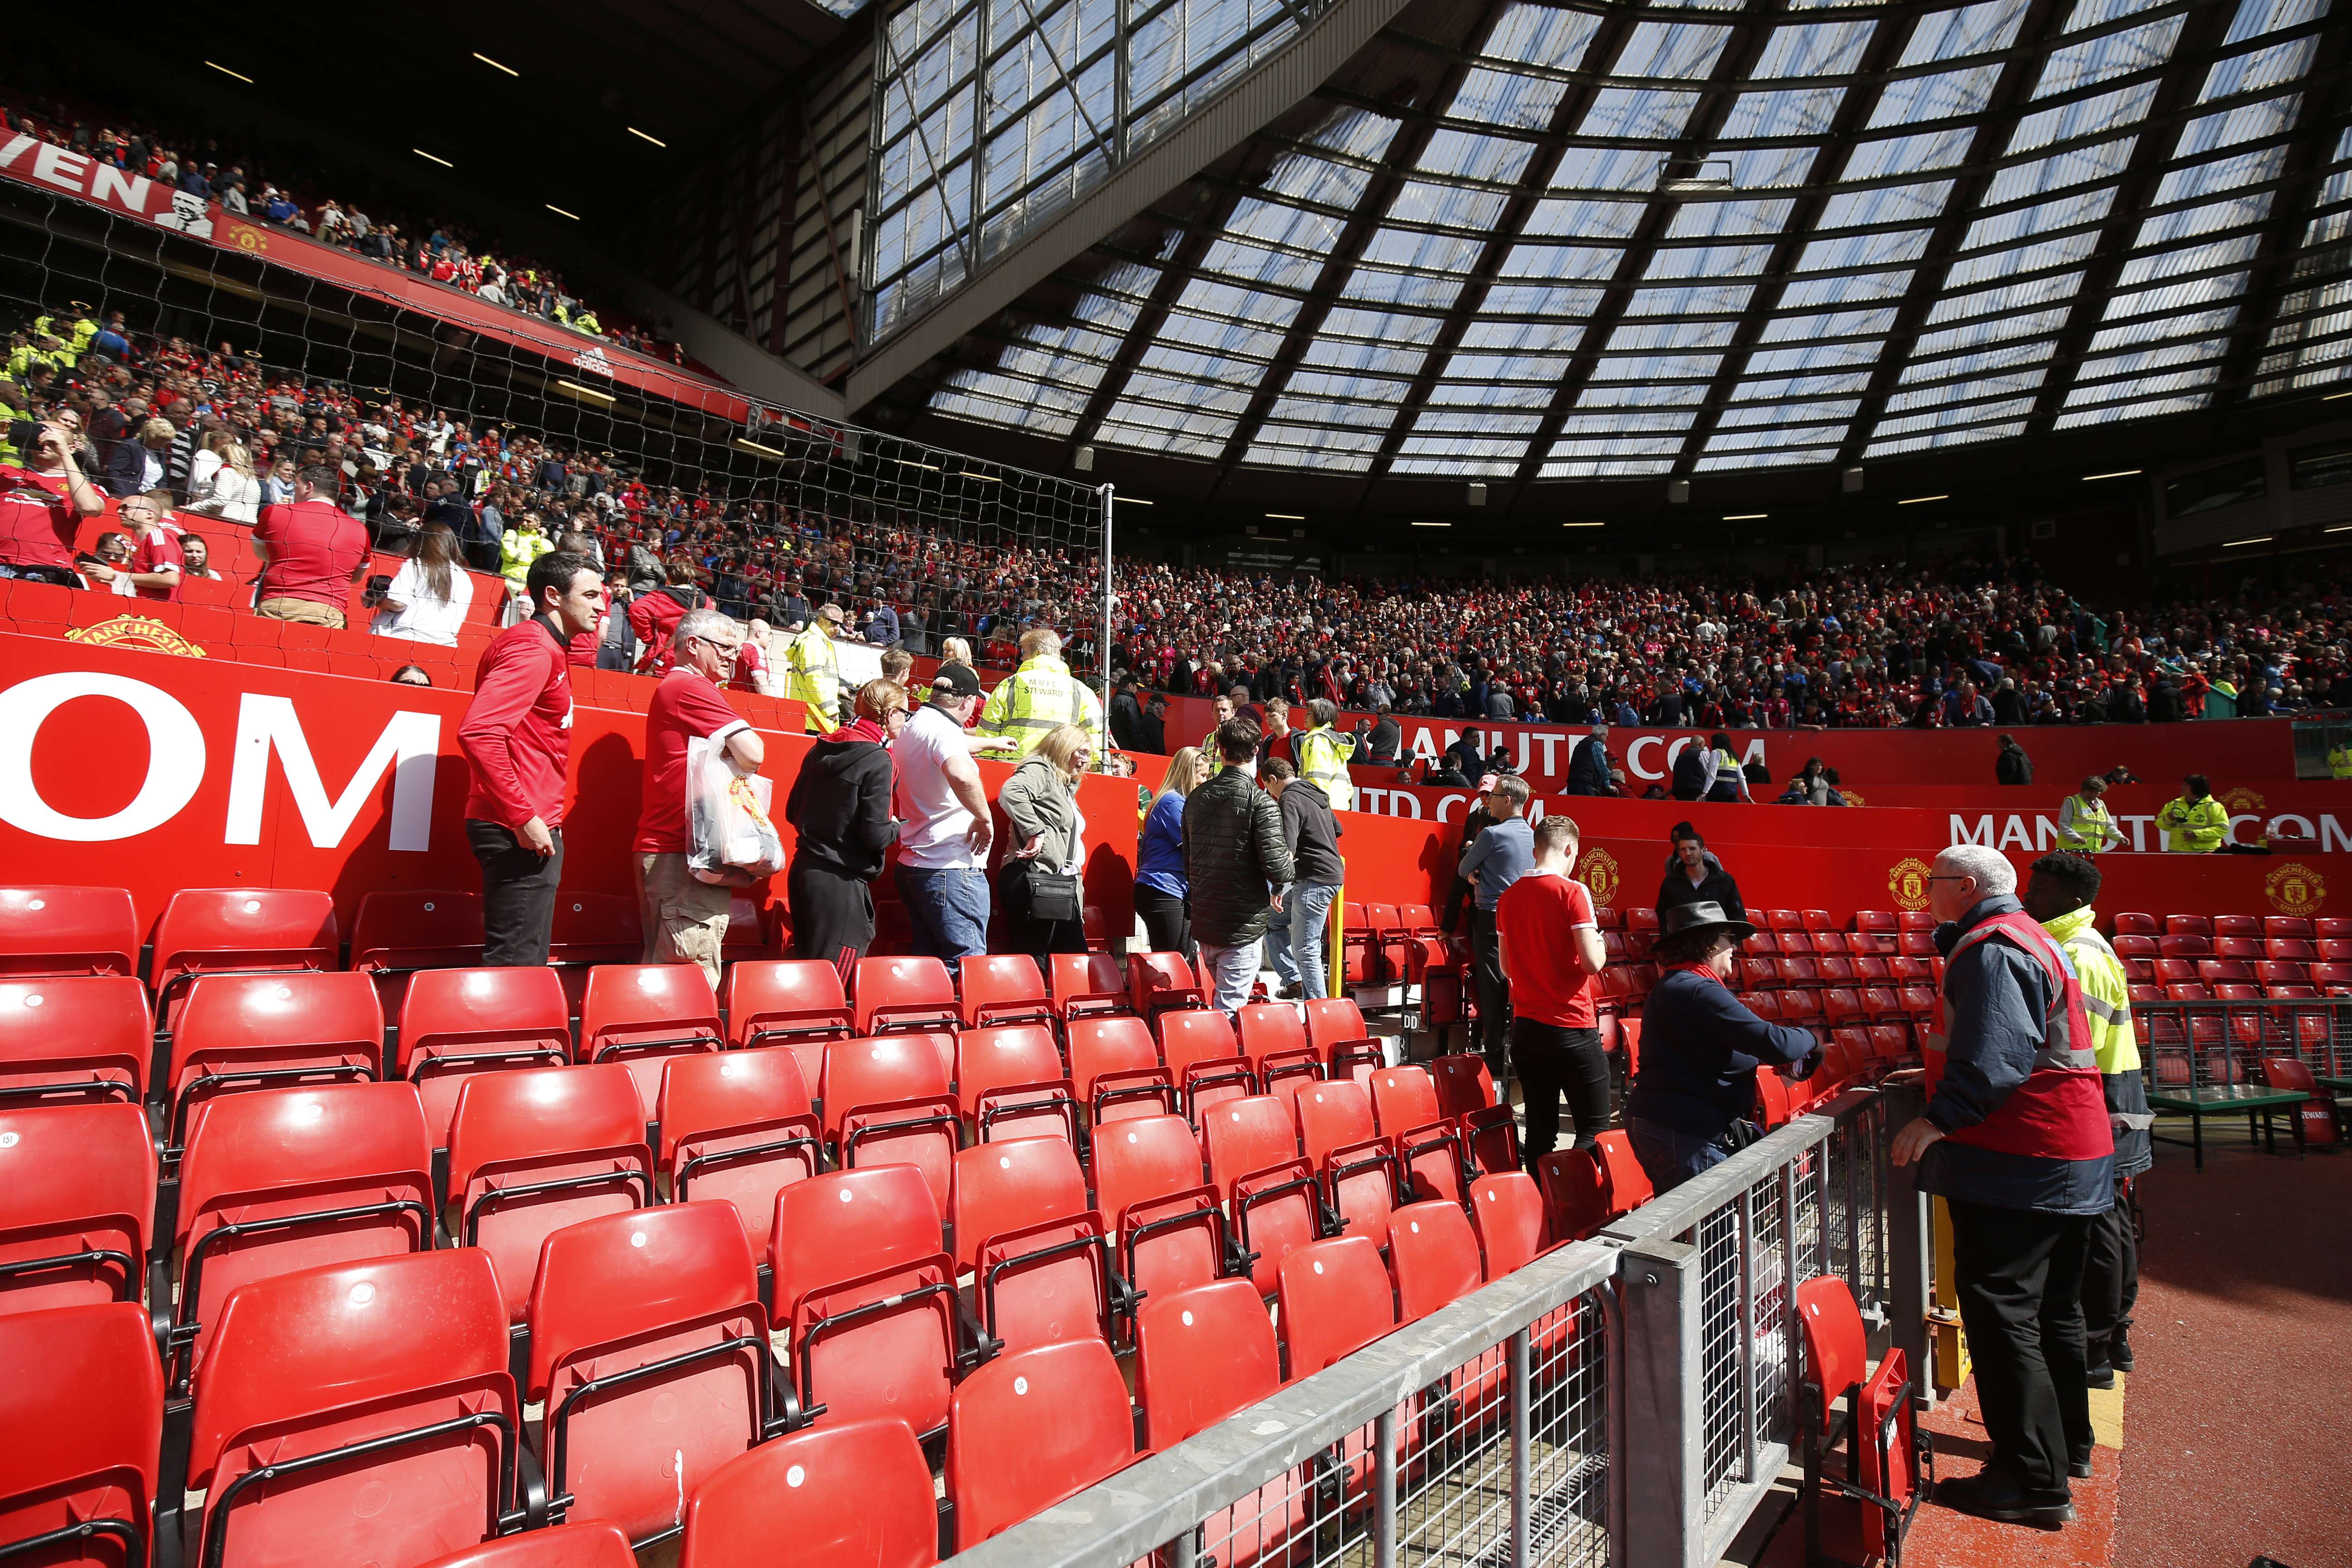 Football fans at Old Trafford evacuate the ground after the discovery of a suspect device. Photo: Reuters